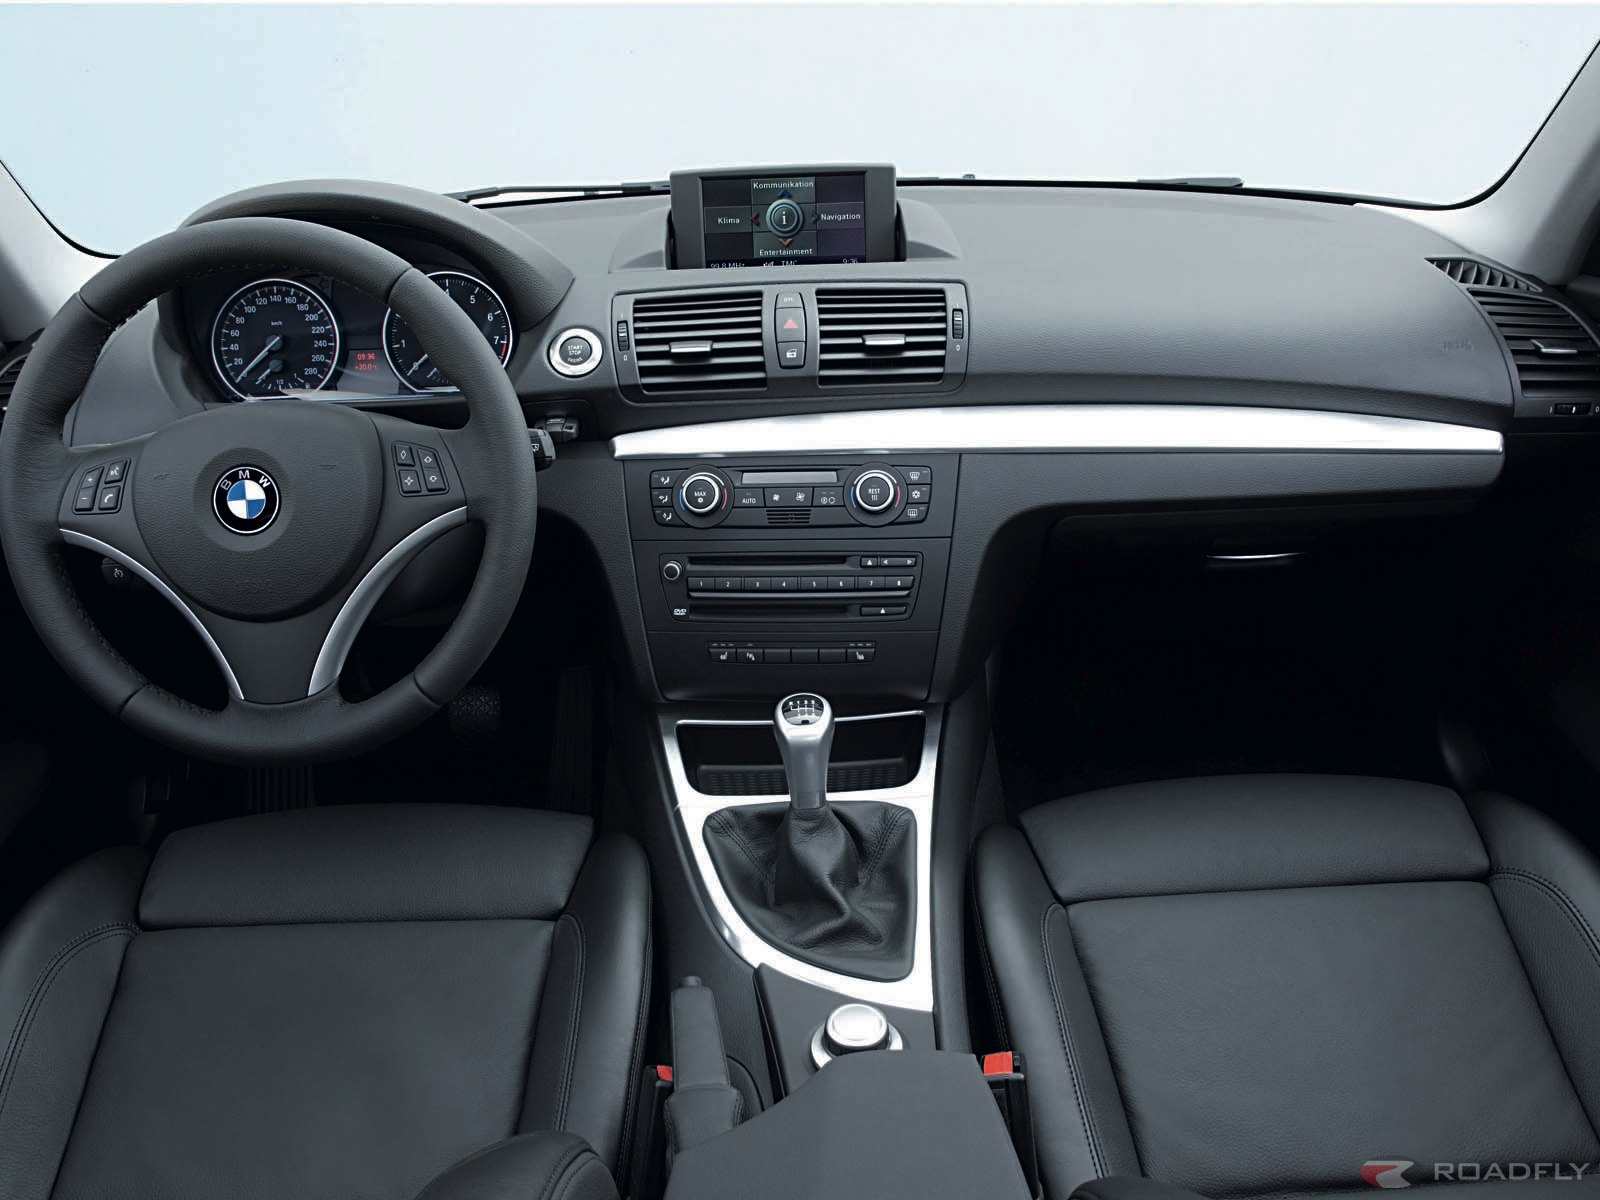 bmw-1-series-coupe-interior. The interior is decently devoid of extraneous